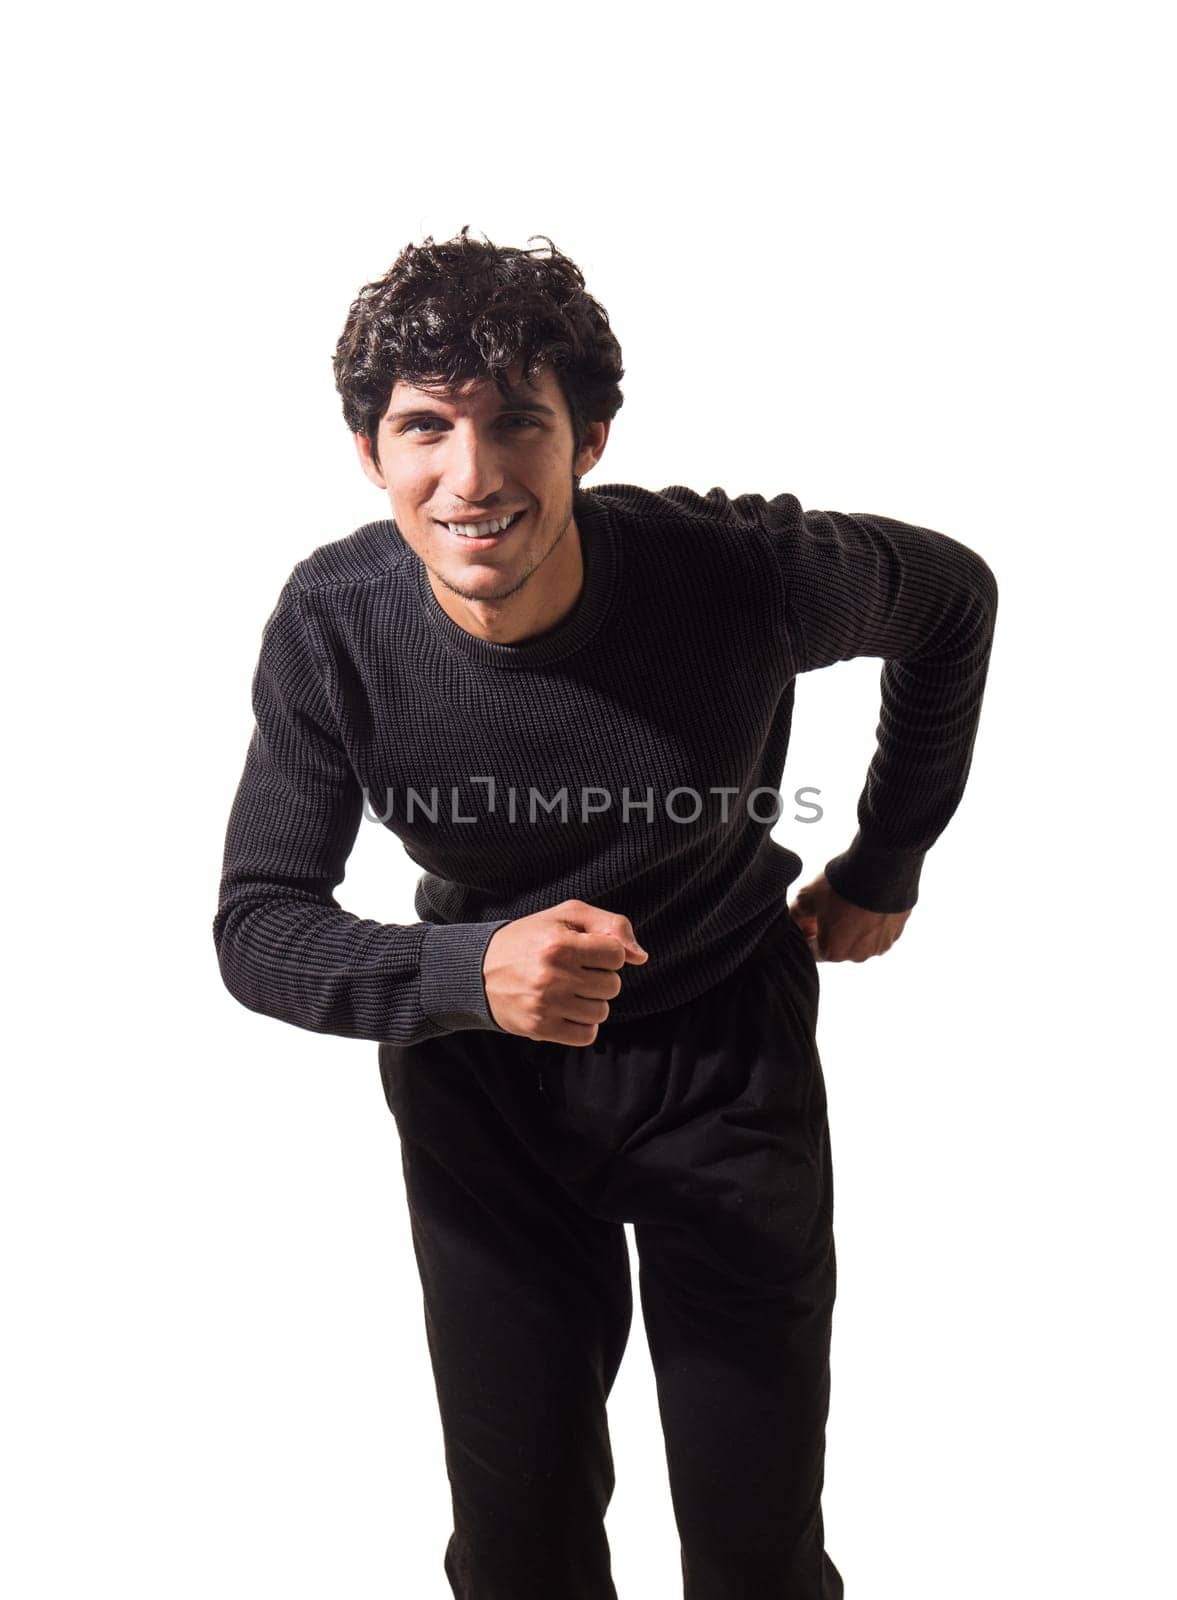 A handsome young man in a black sweater and black pants, running towards the camera, smiling, isolated on white